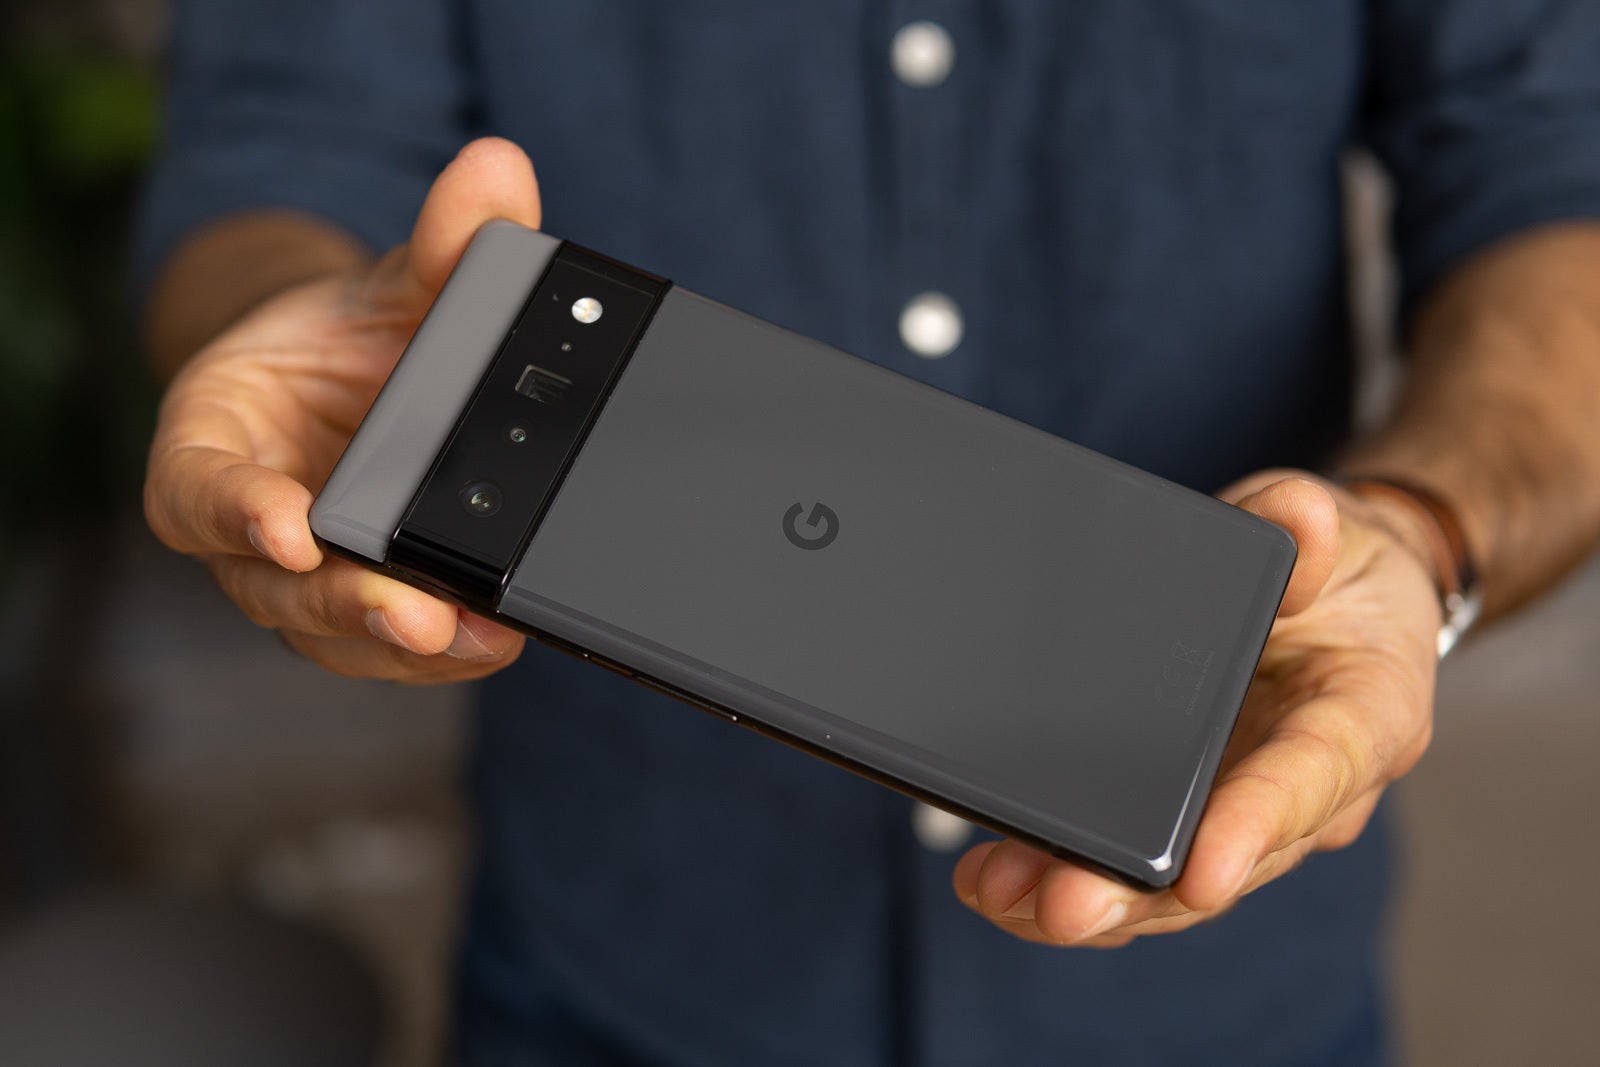 The fourth quarter of 2021 was the best quarter in Pixel history - The Pixel line enjoys its best quarter ever; Google profits soar as shares will split 20-1